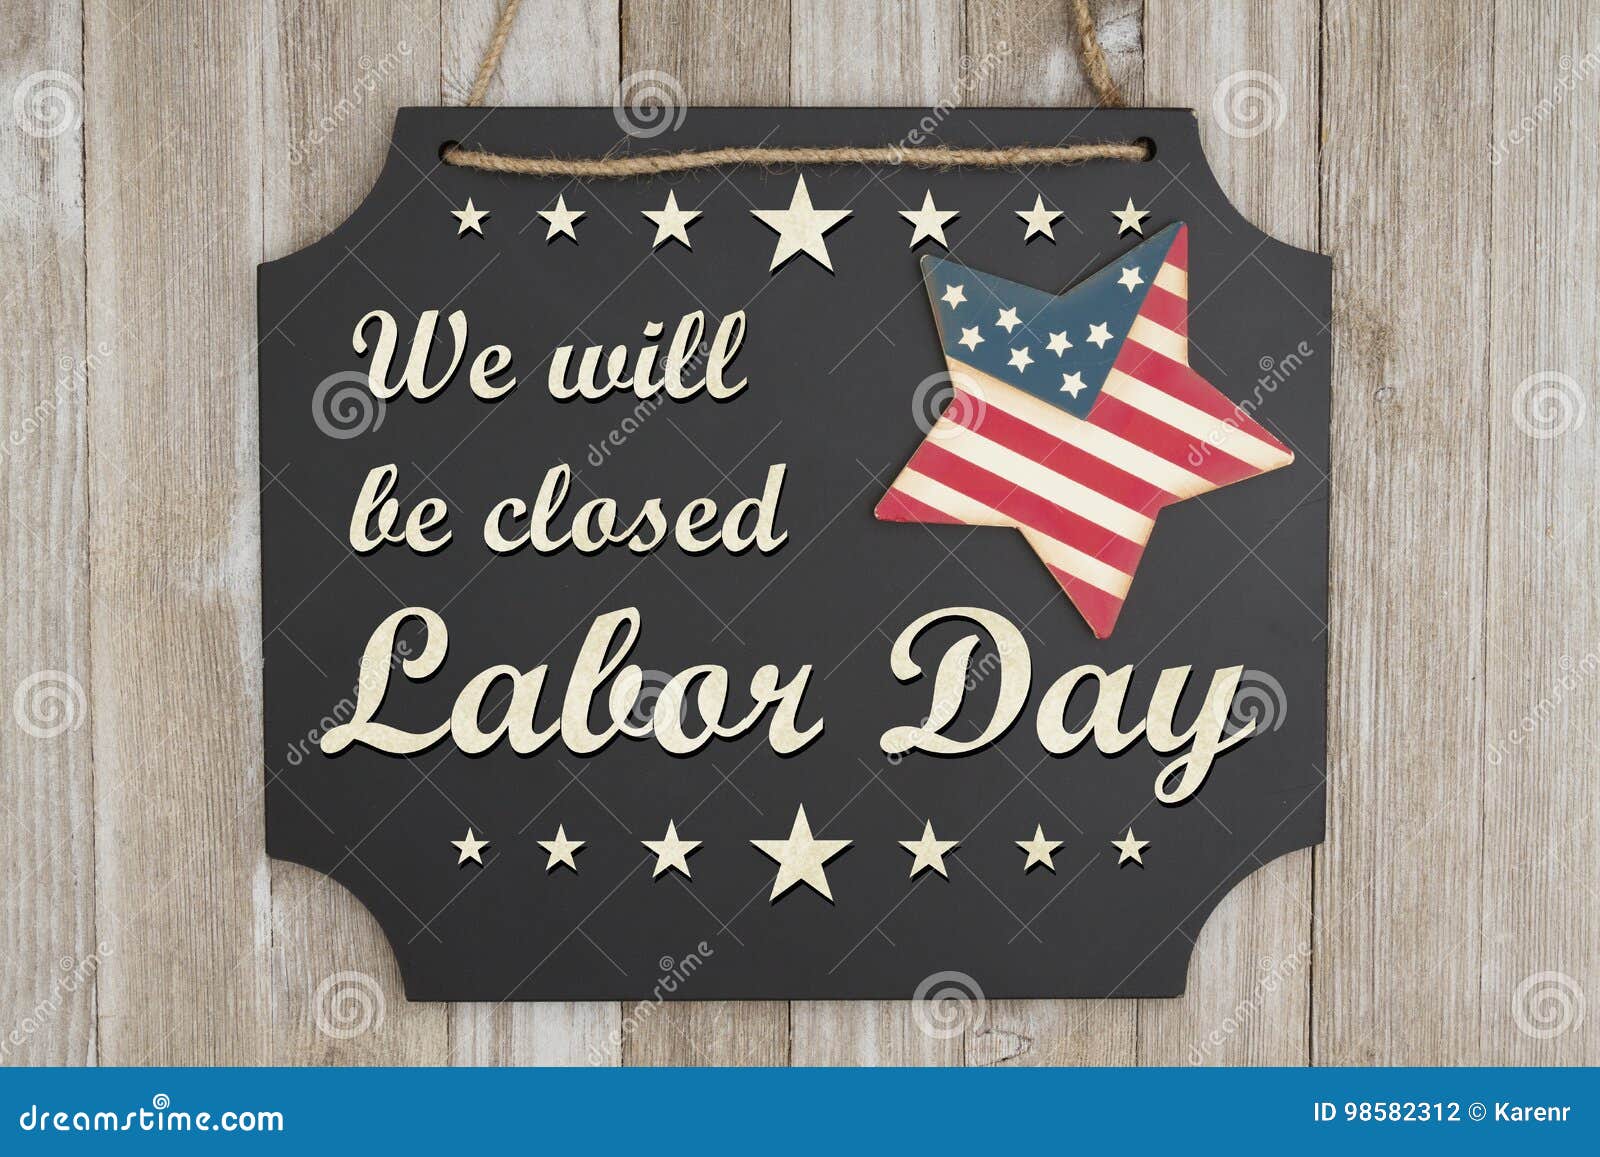 we will be closed labor day message